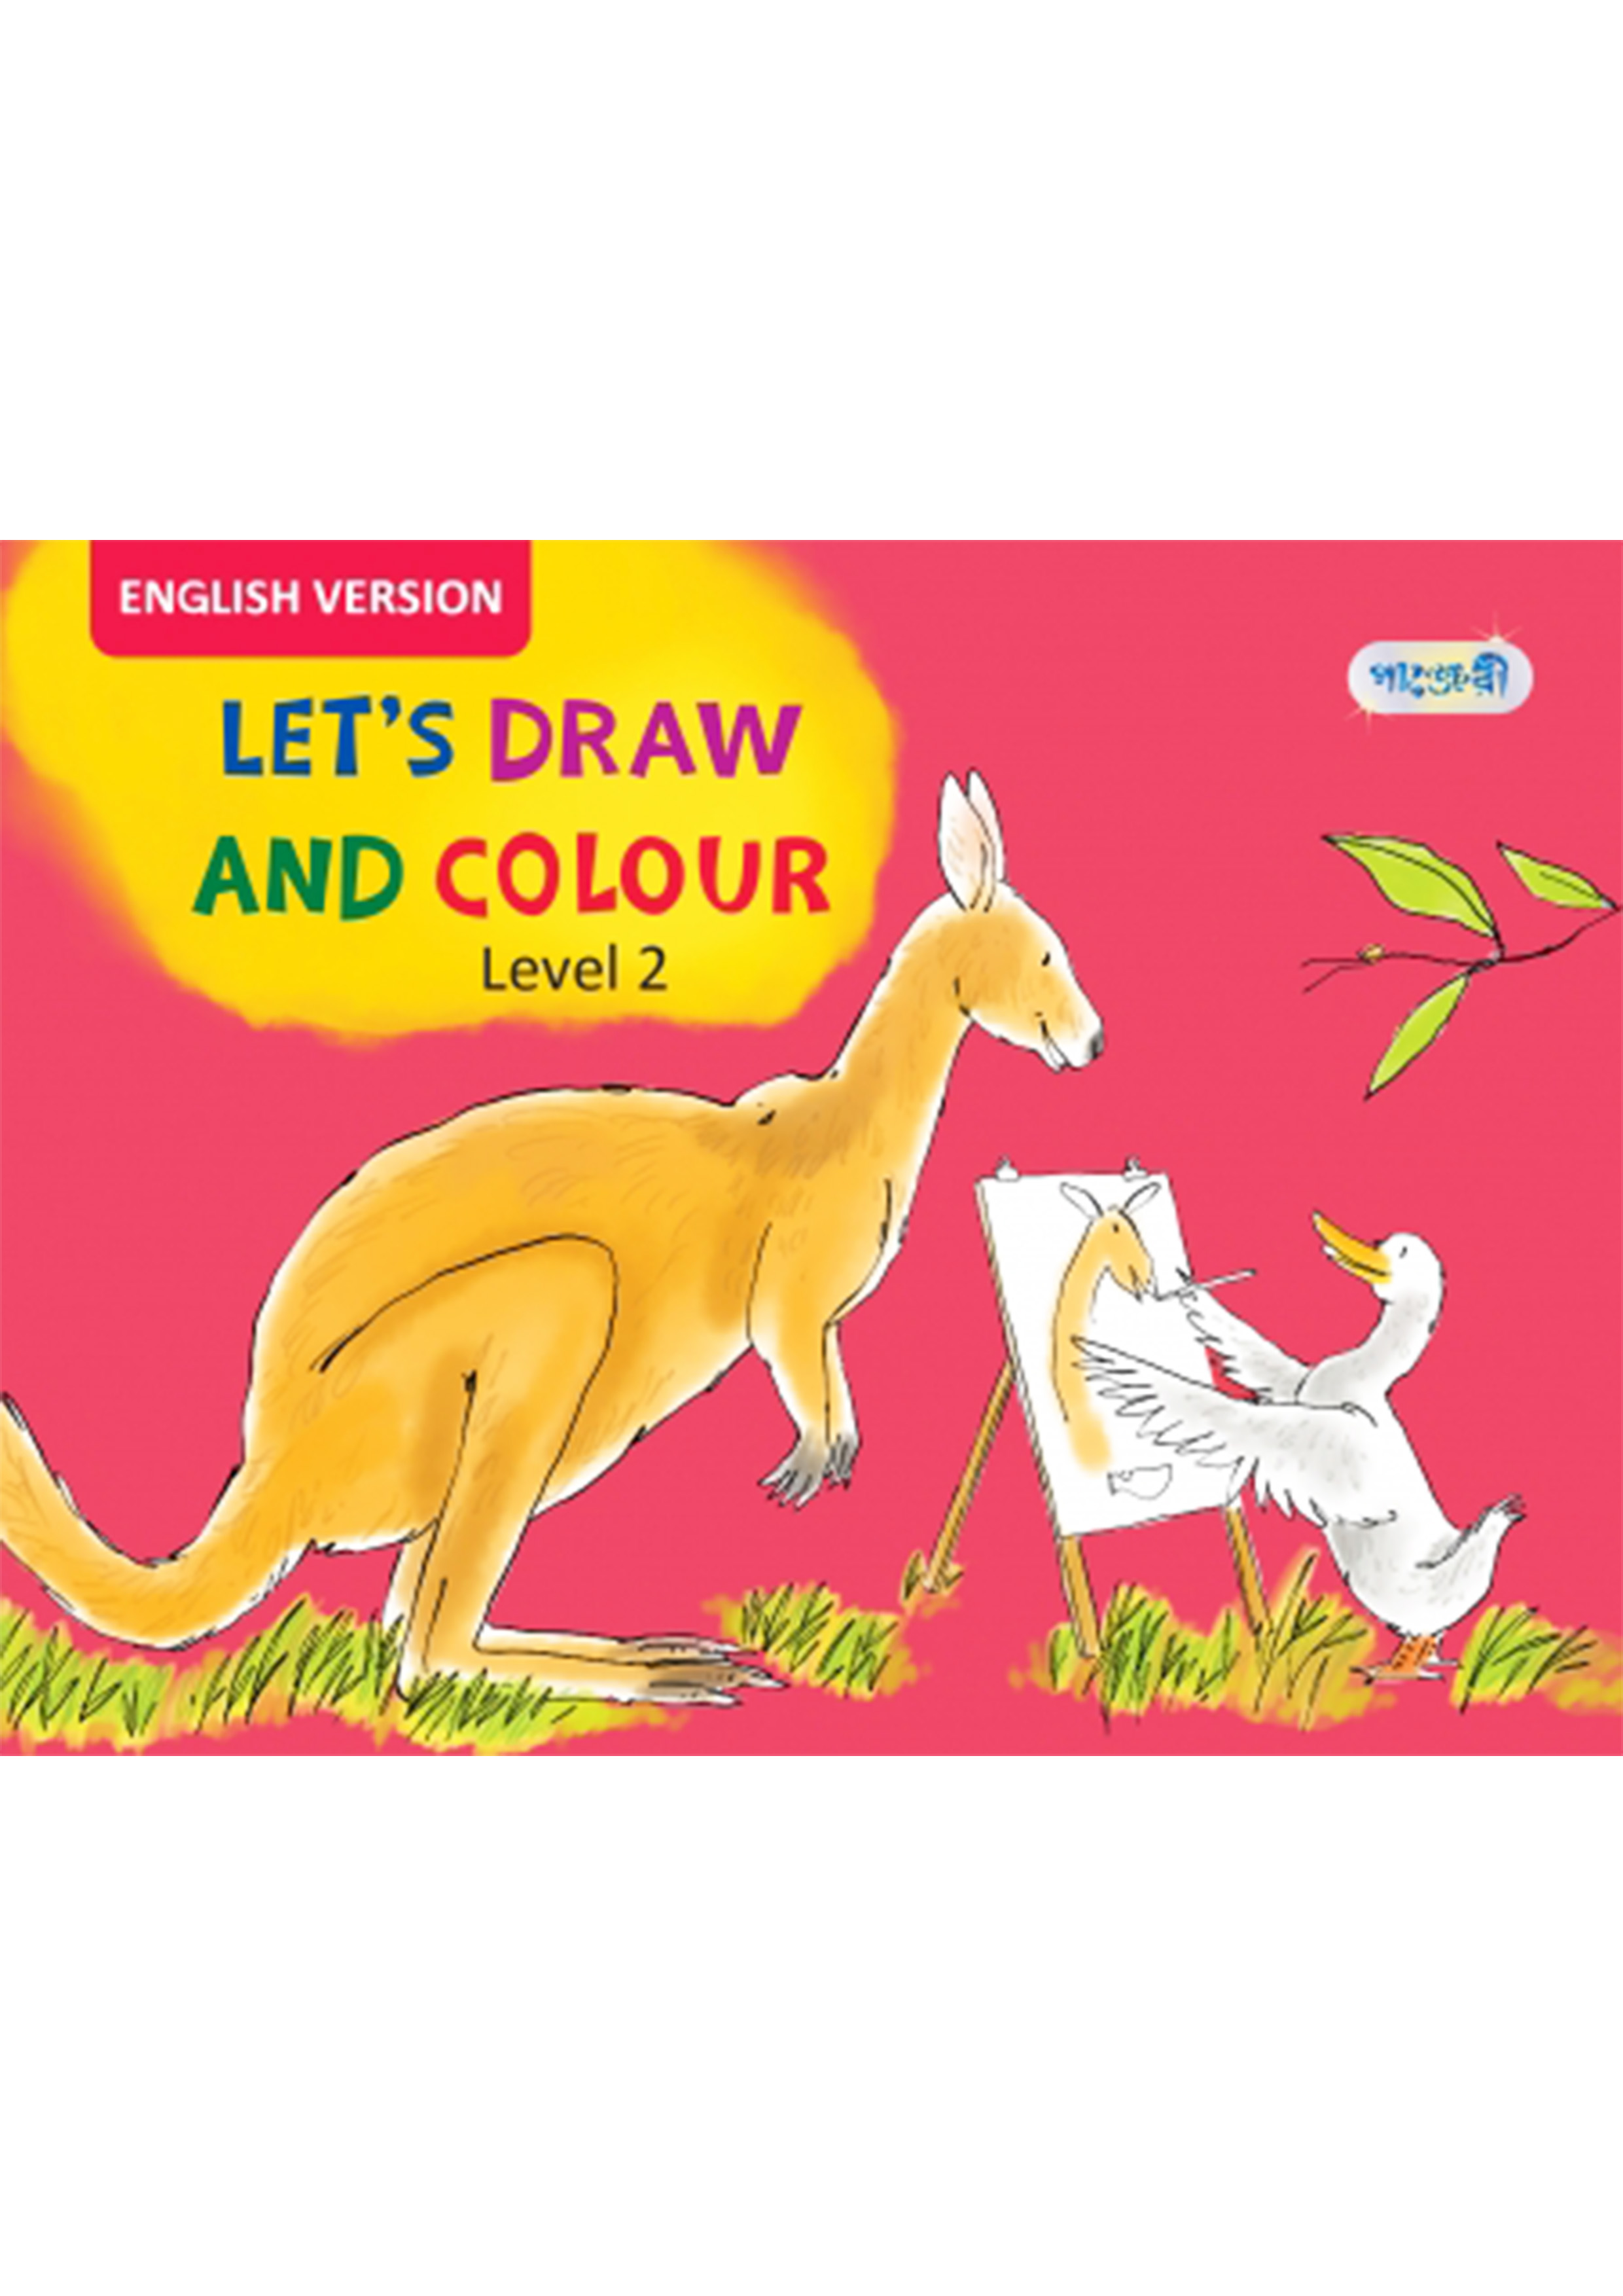 Let's Draw And Colour, Level 2 For Nursery - English Version (পেপারব্যাক)